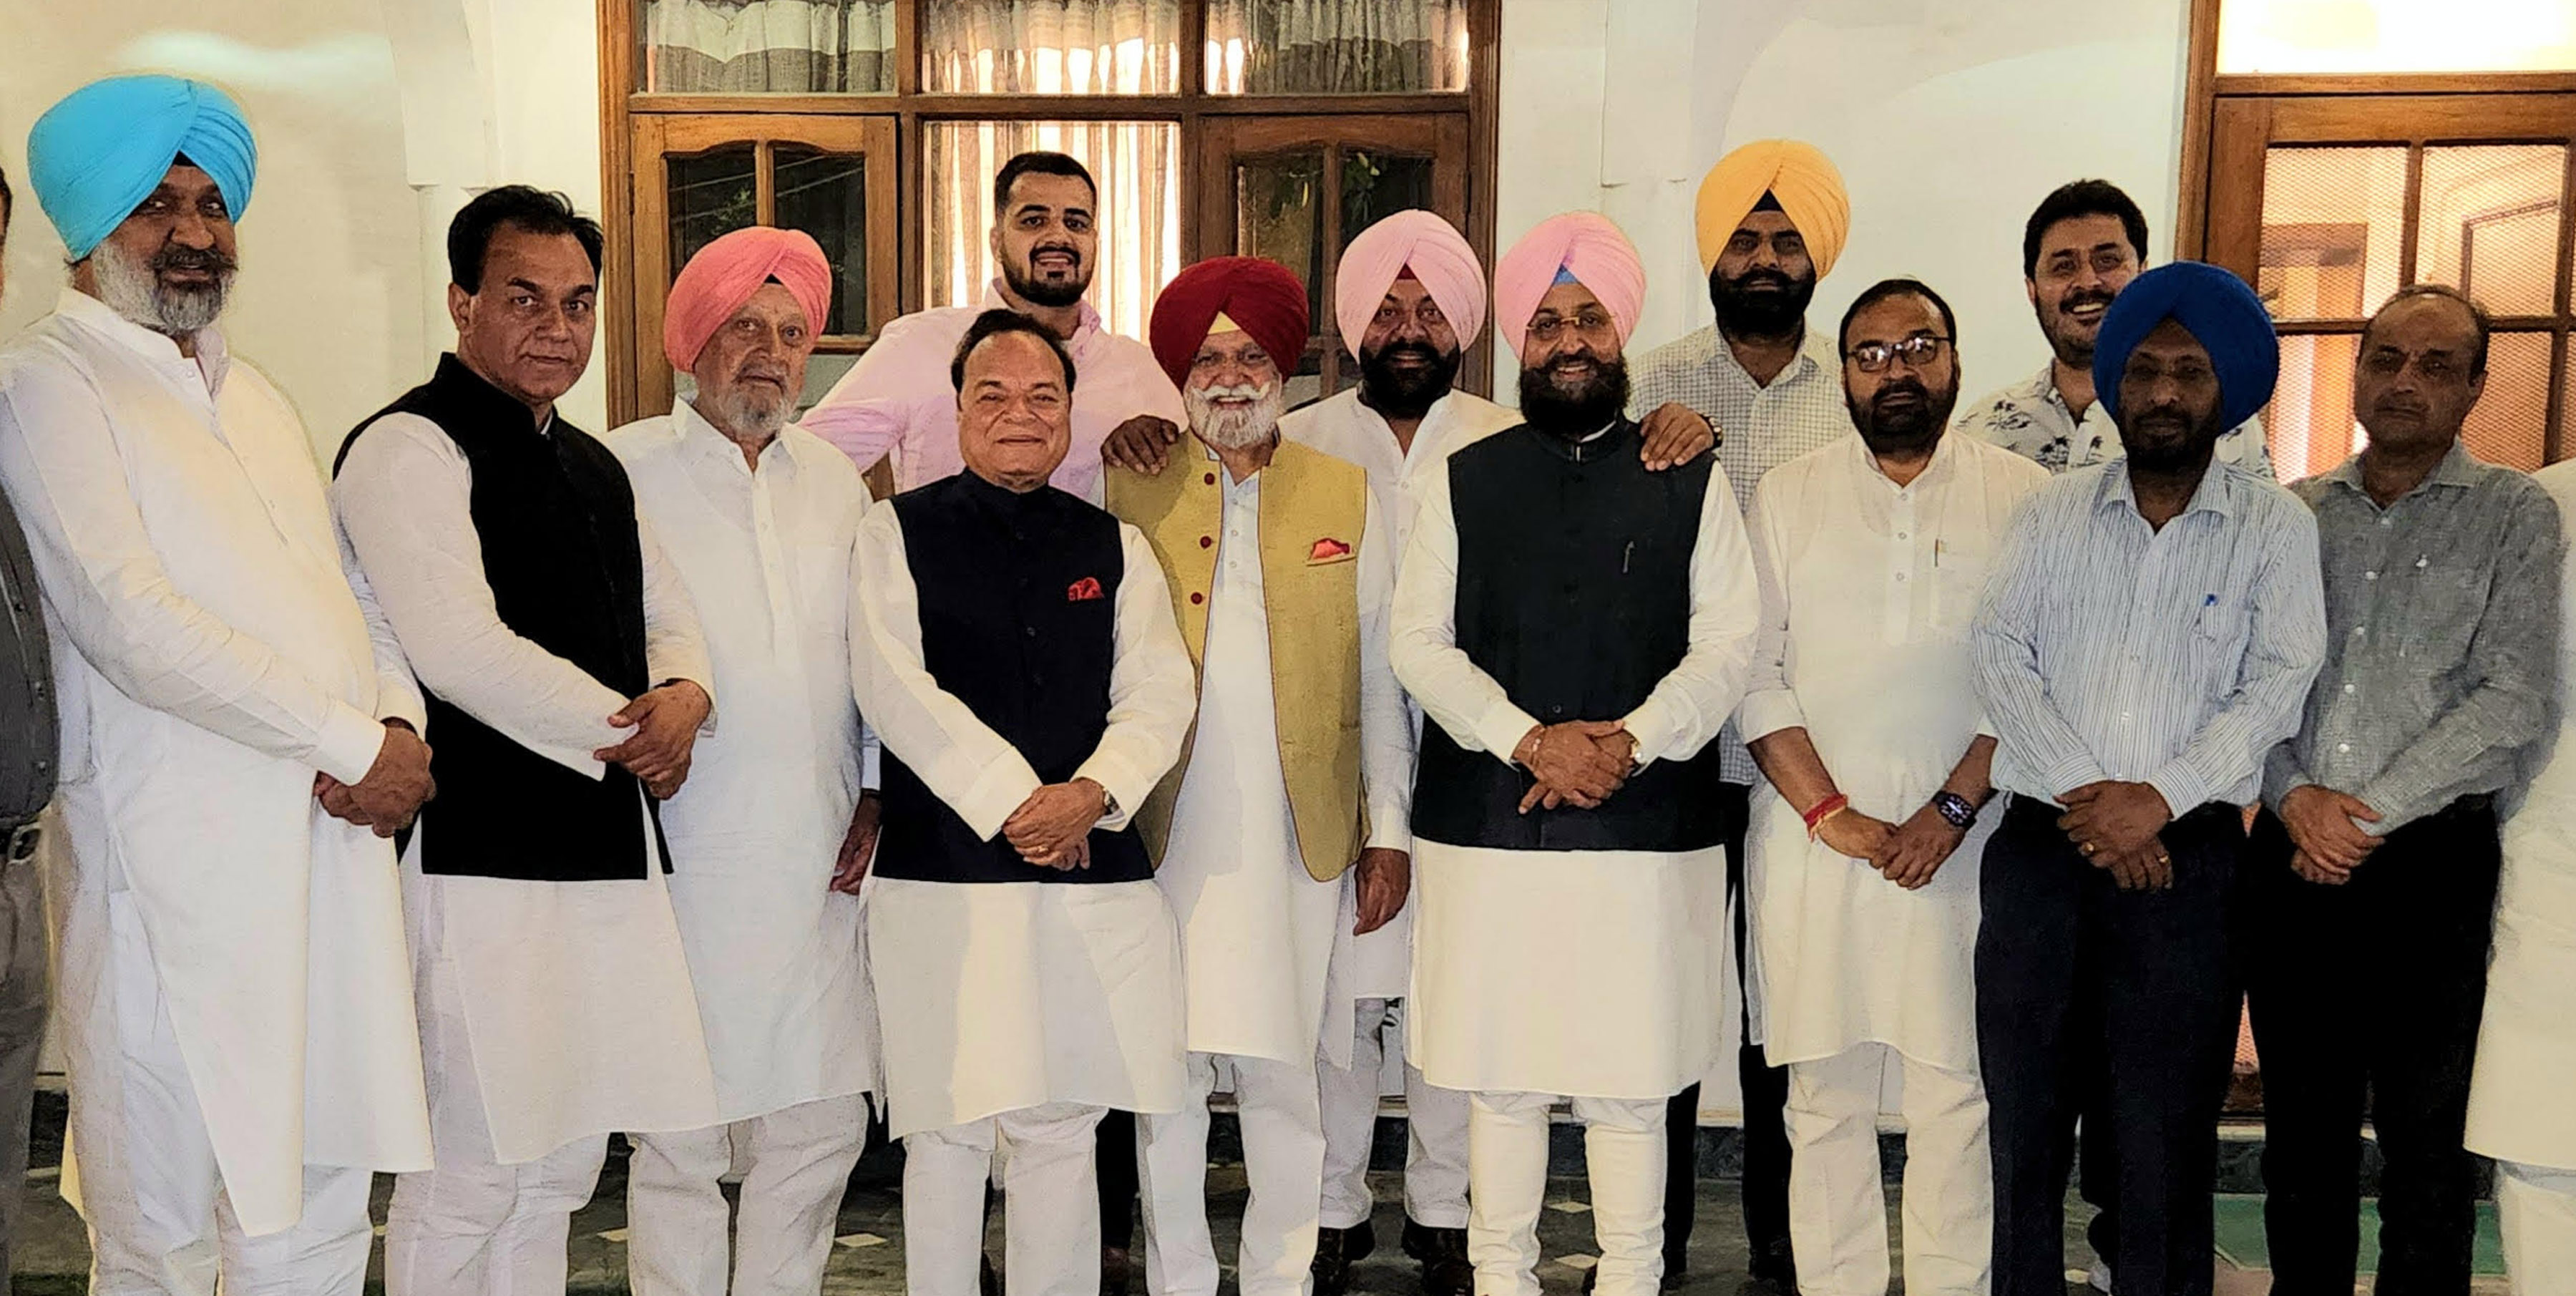 Dinner diplomacy: Chaudhary Santokh Singh's attempt to bring Congress flock together